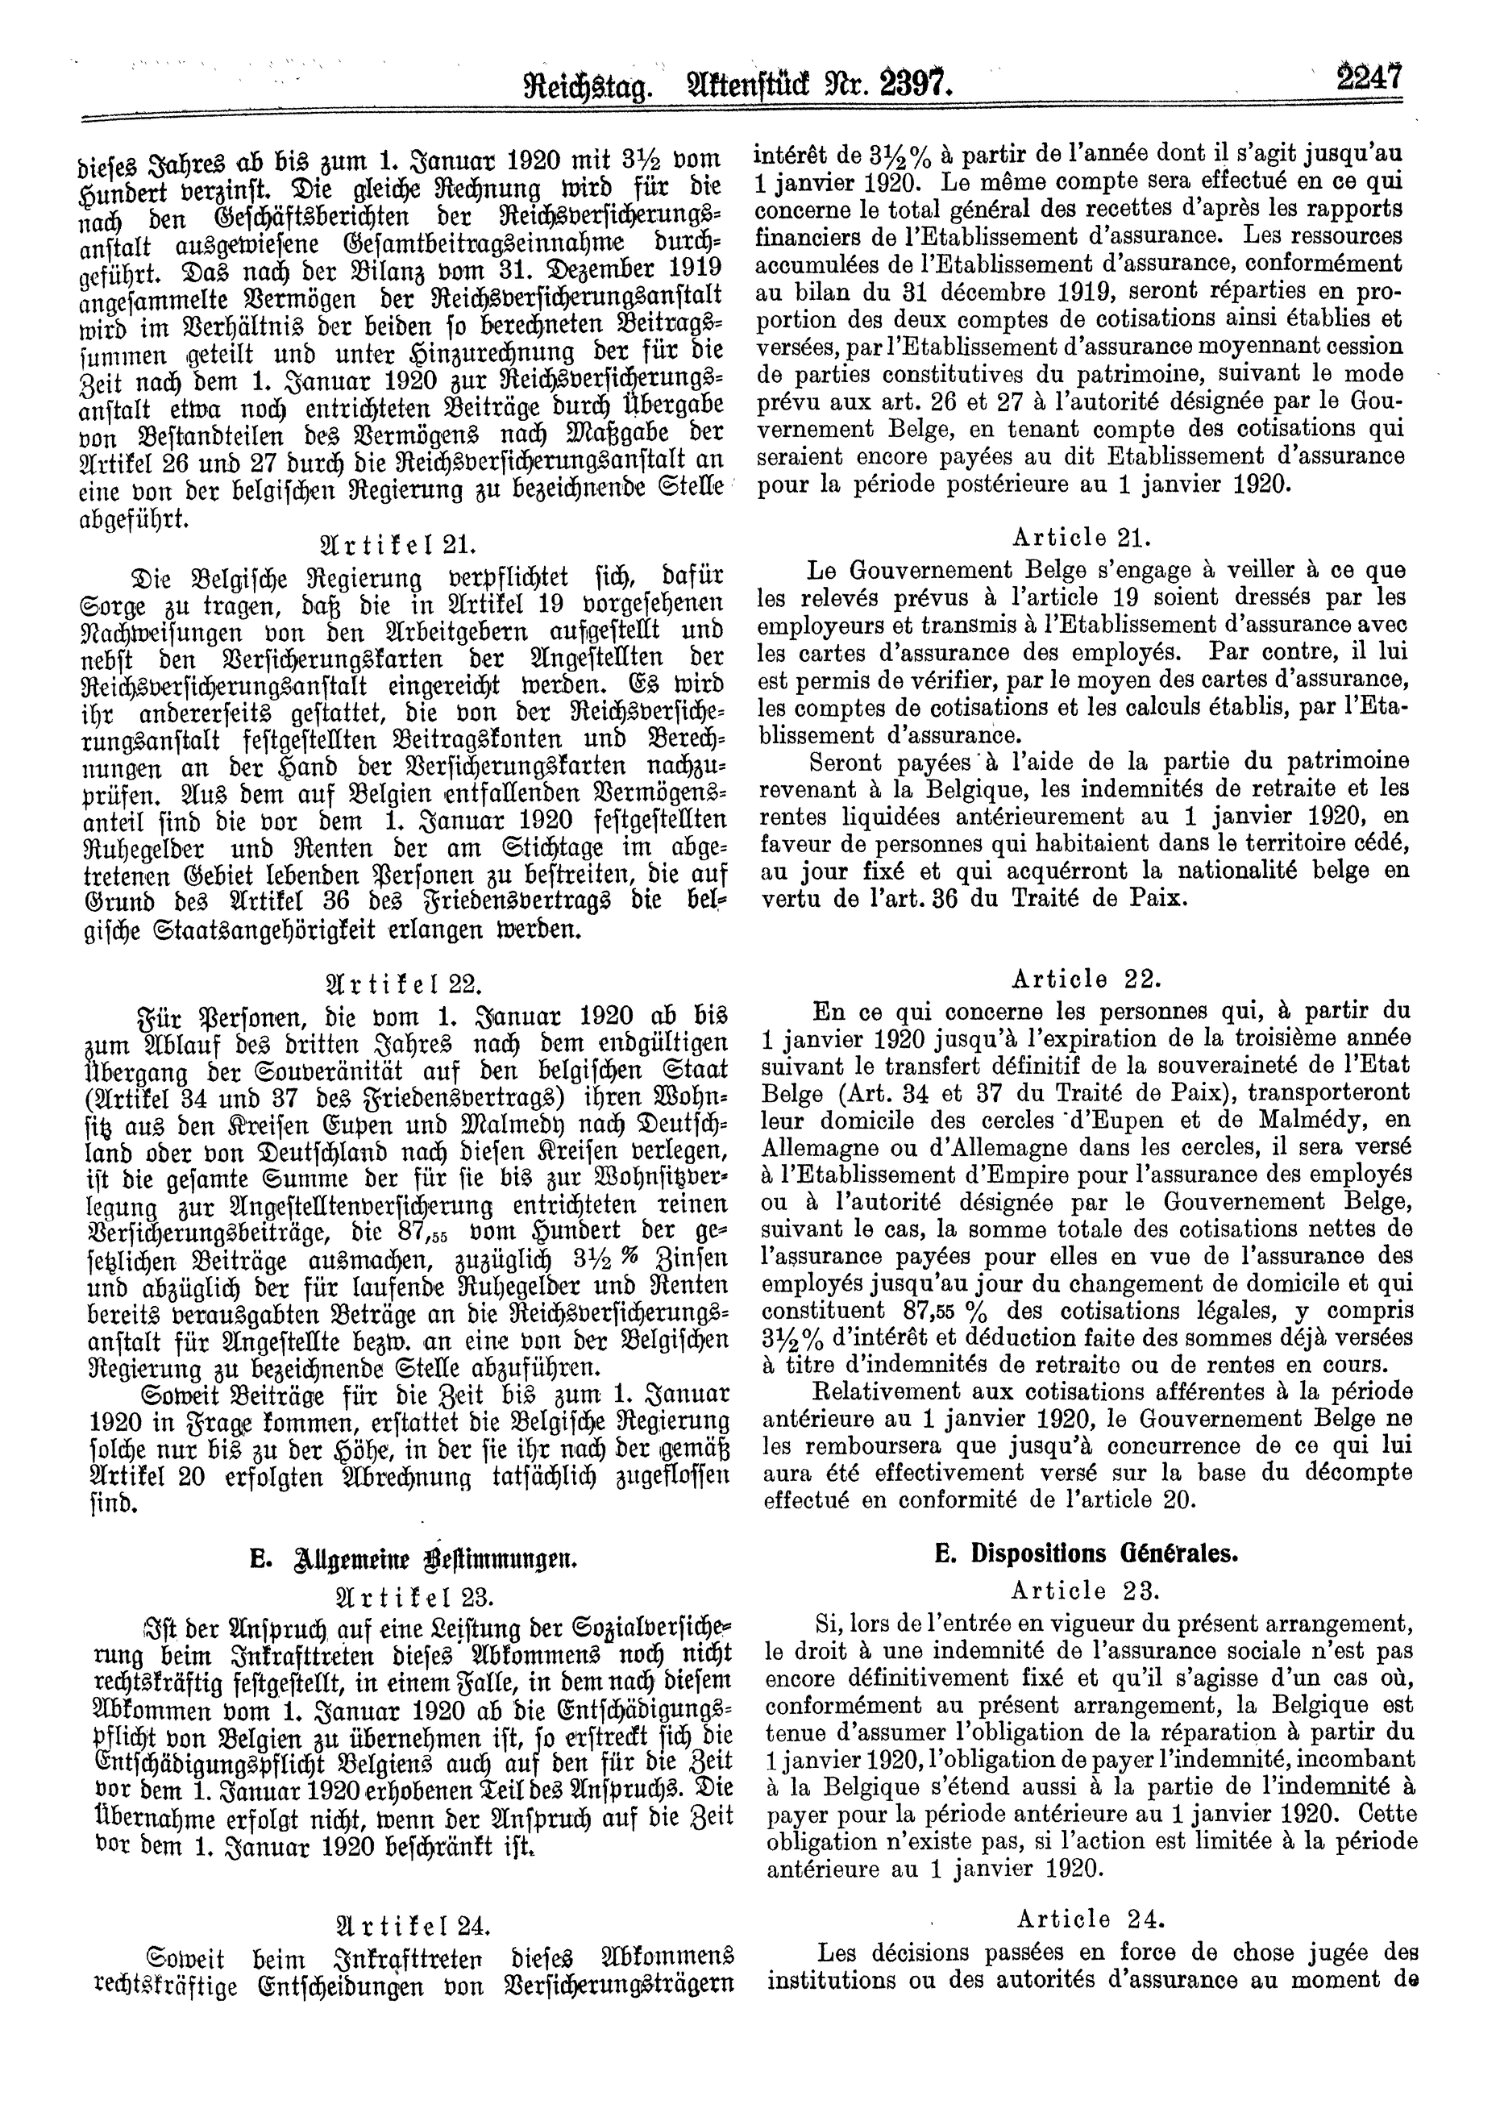 Scan of page 2247